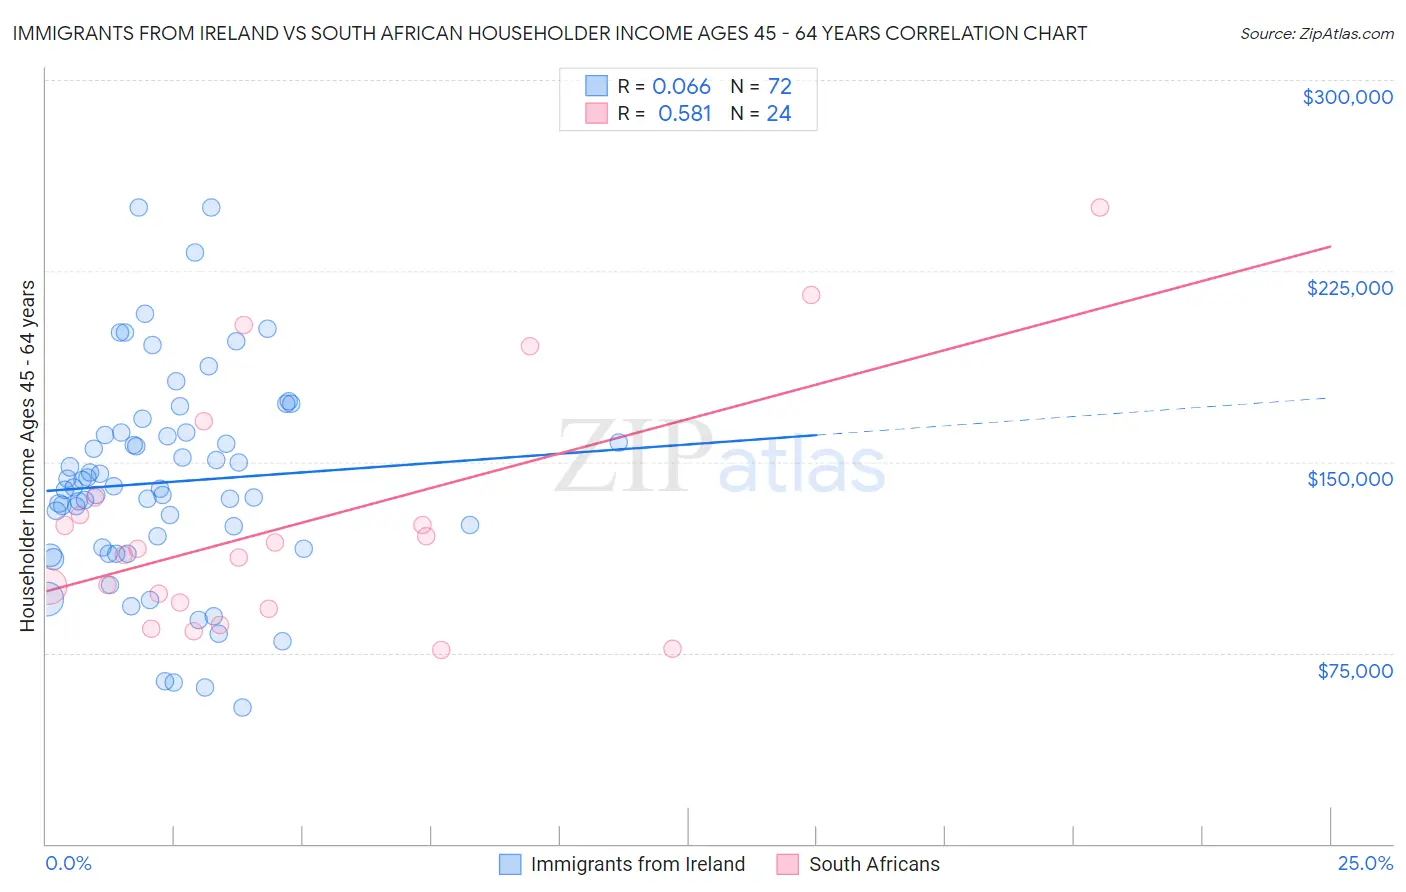 Immigrants from Ireland vs South African Householder Income Ages 45 - 64 years